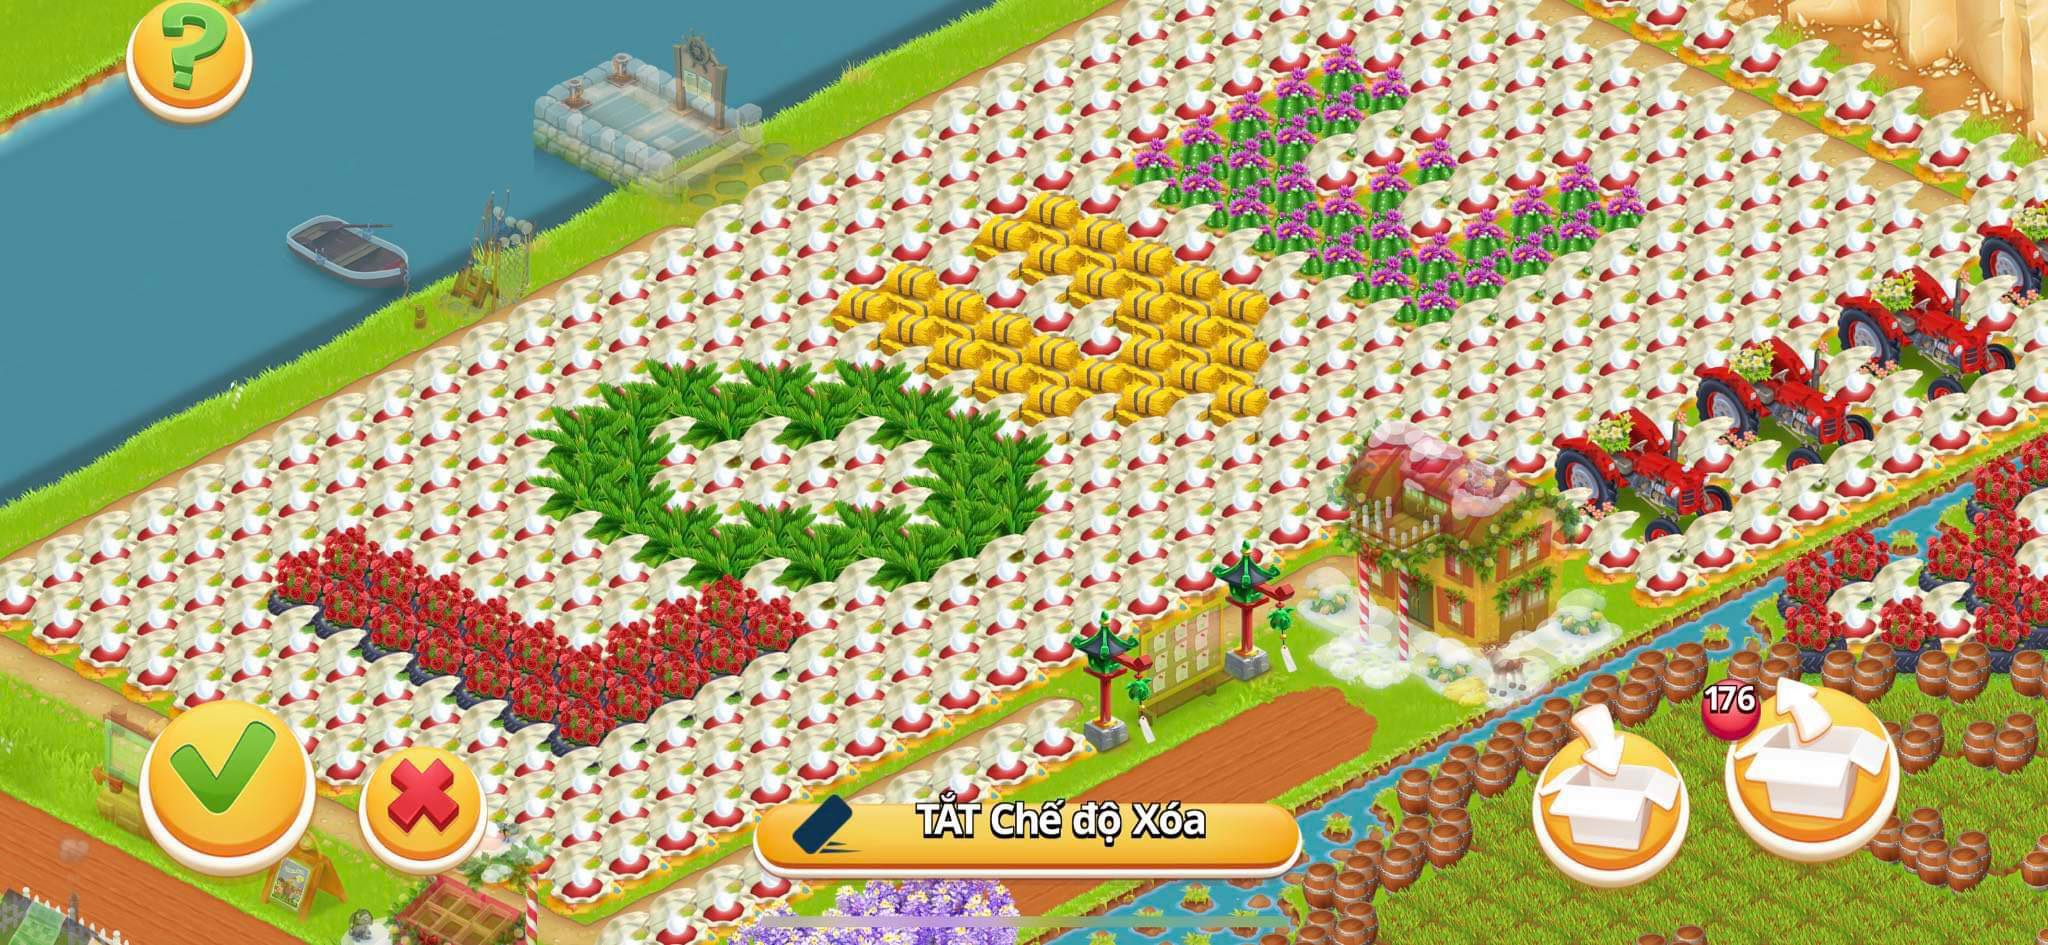 VIP ACC, Level 285 barn 13k750 silo 10k7 - town level 42 - available 410 Pearls - 18,000  - Enough combos of hayday letters, Ferris wheel, 